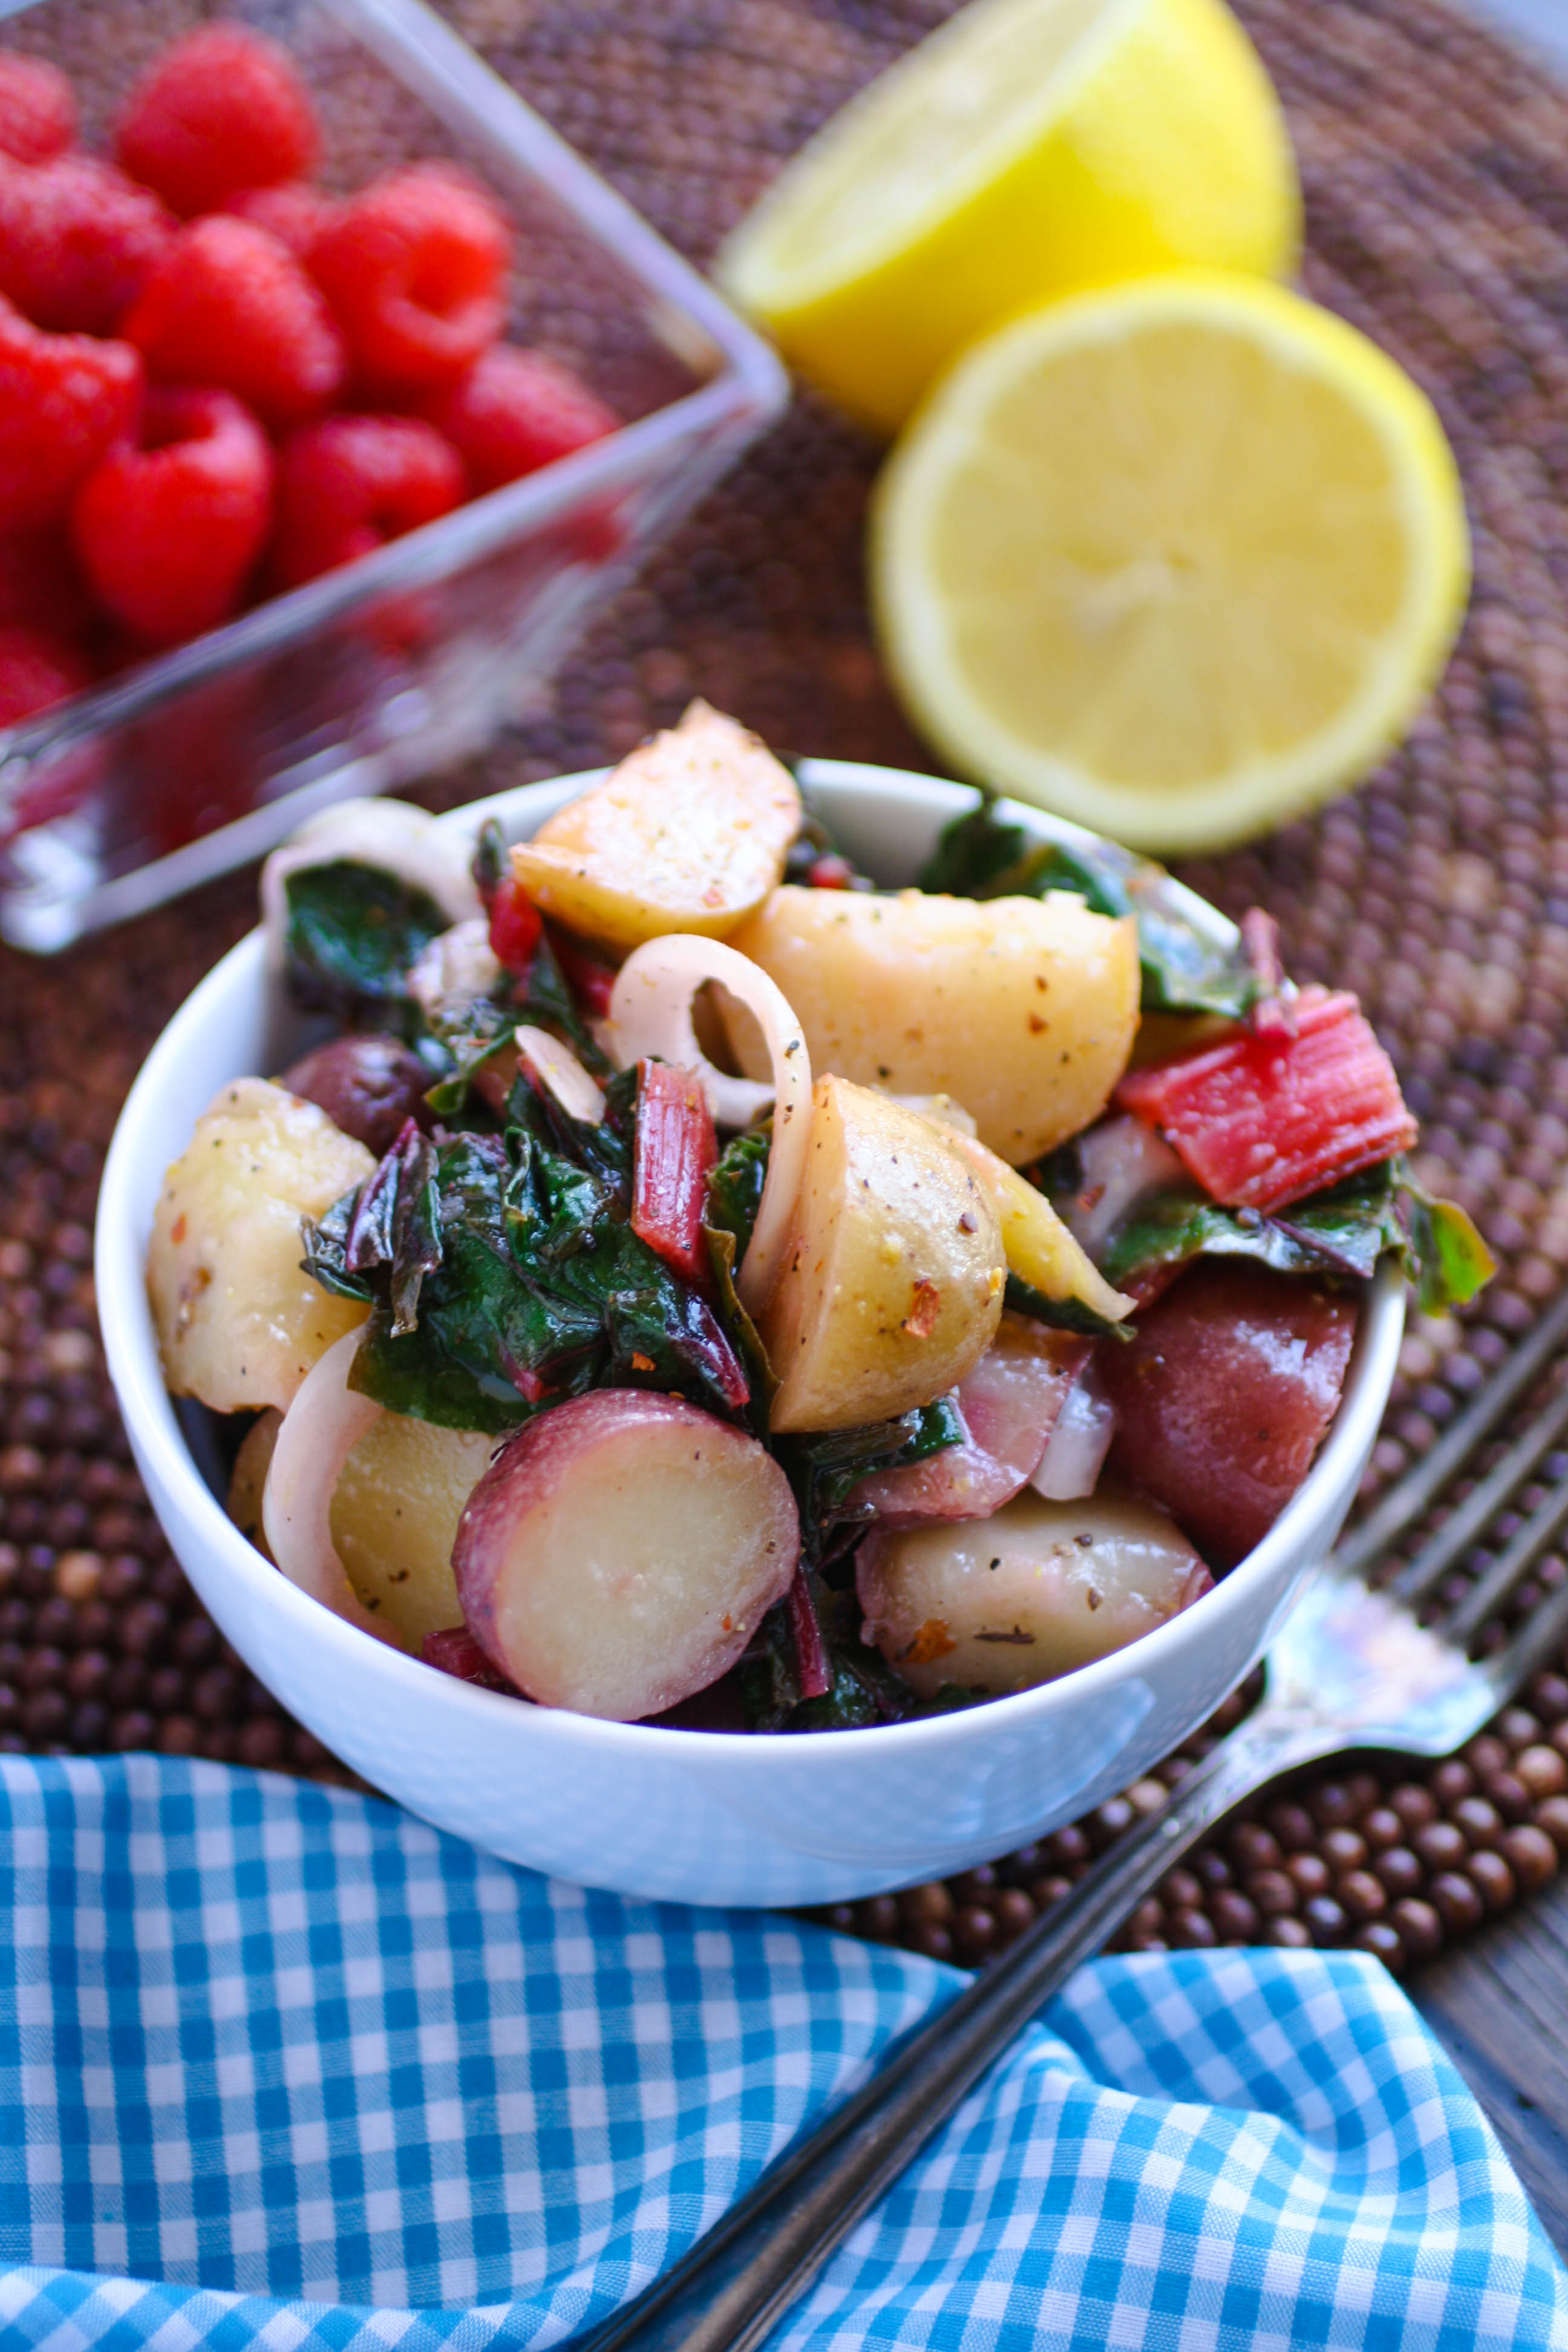 Italian Potato Salad with Swiss Chard is a terrific side dish for the summer. The flavors are amazing, and it's so easy to make!